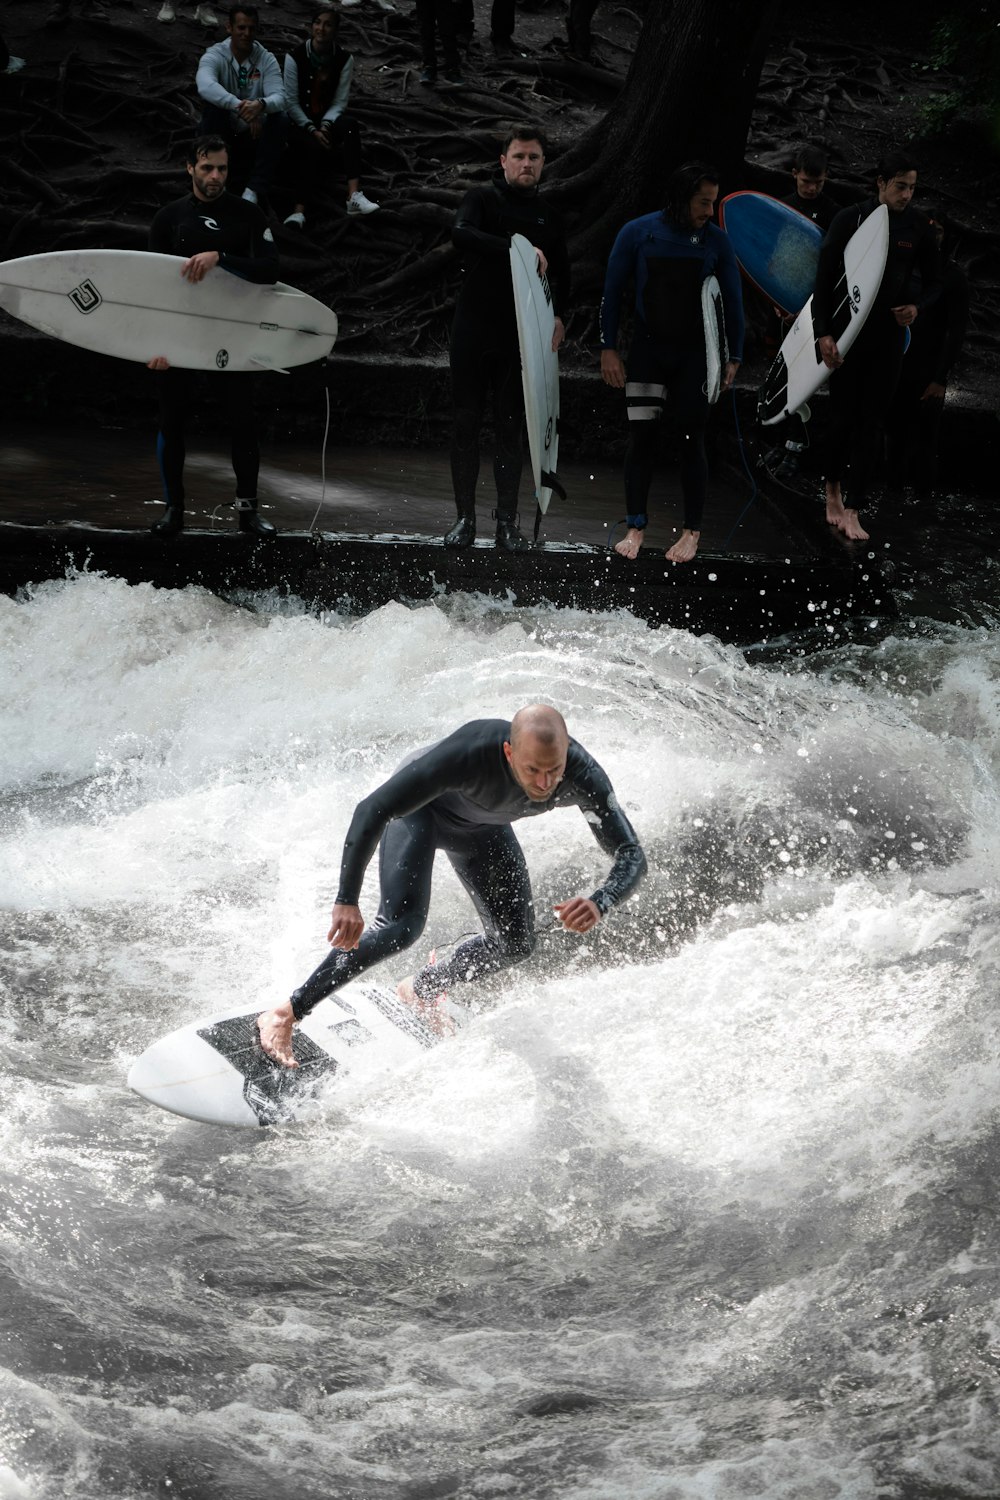 man in blue wet suit riding white surfboard on water during daytime